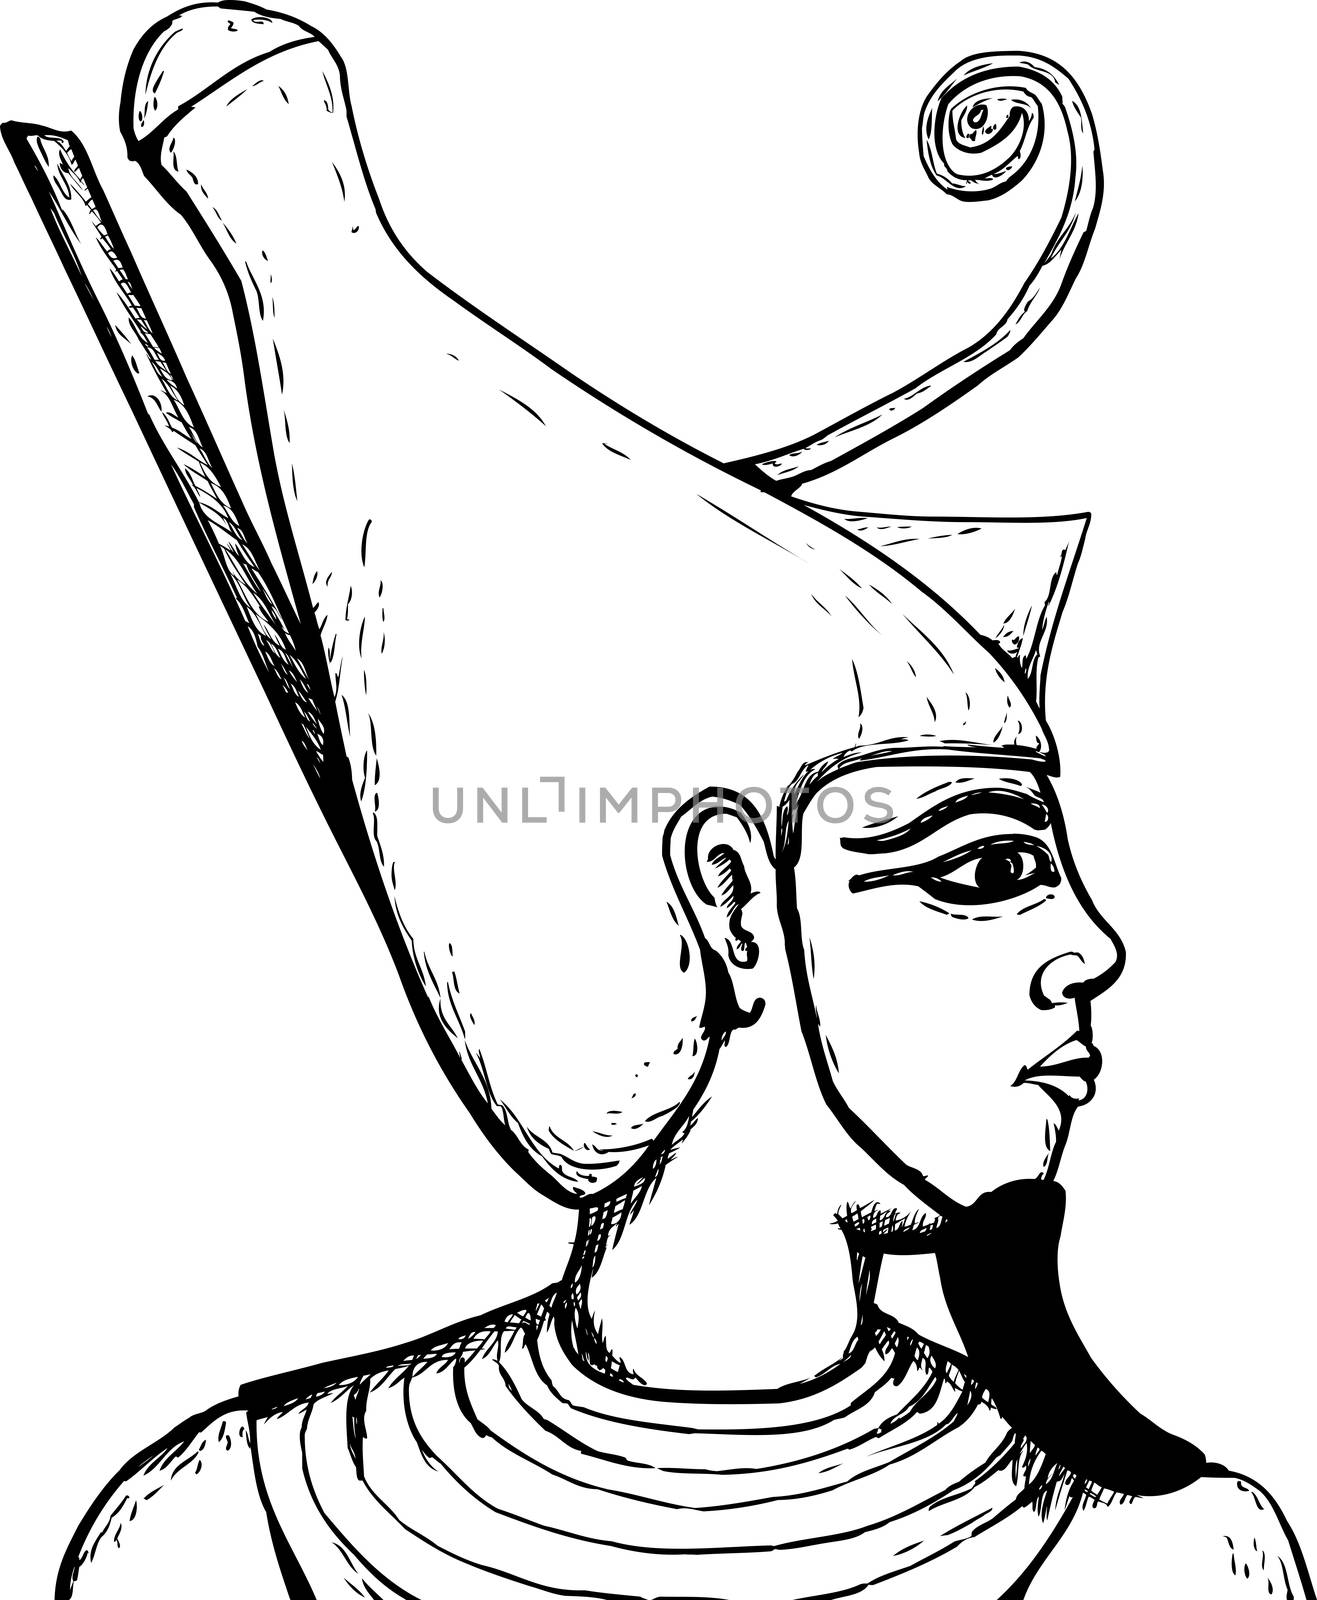 Outlined side view of ancient Egyptian god Atum over white